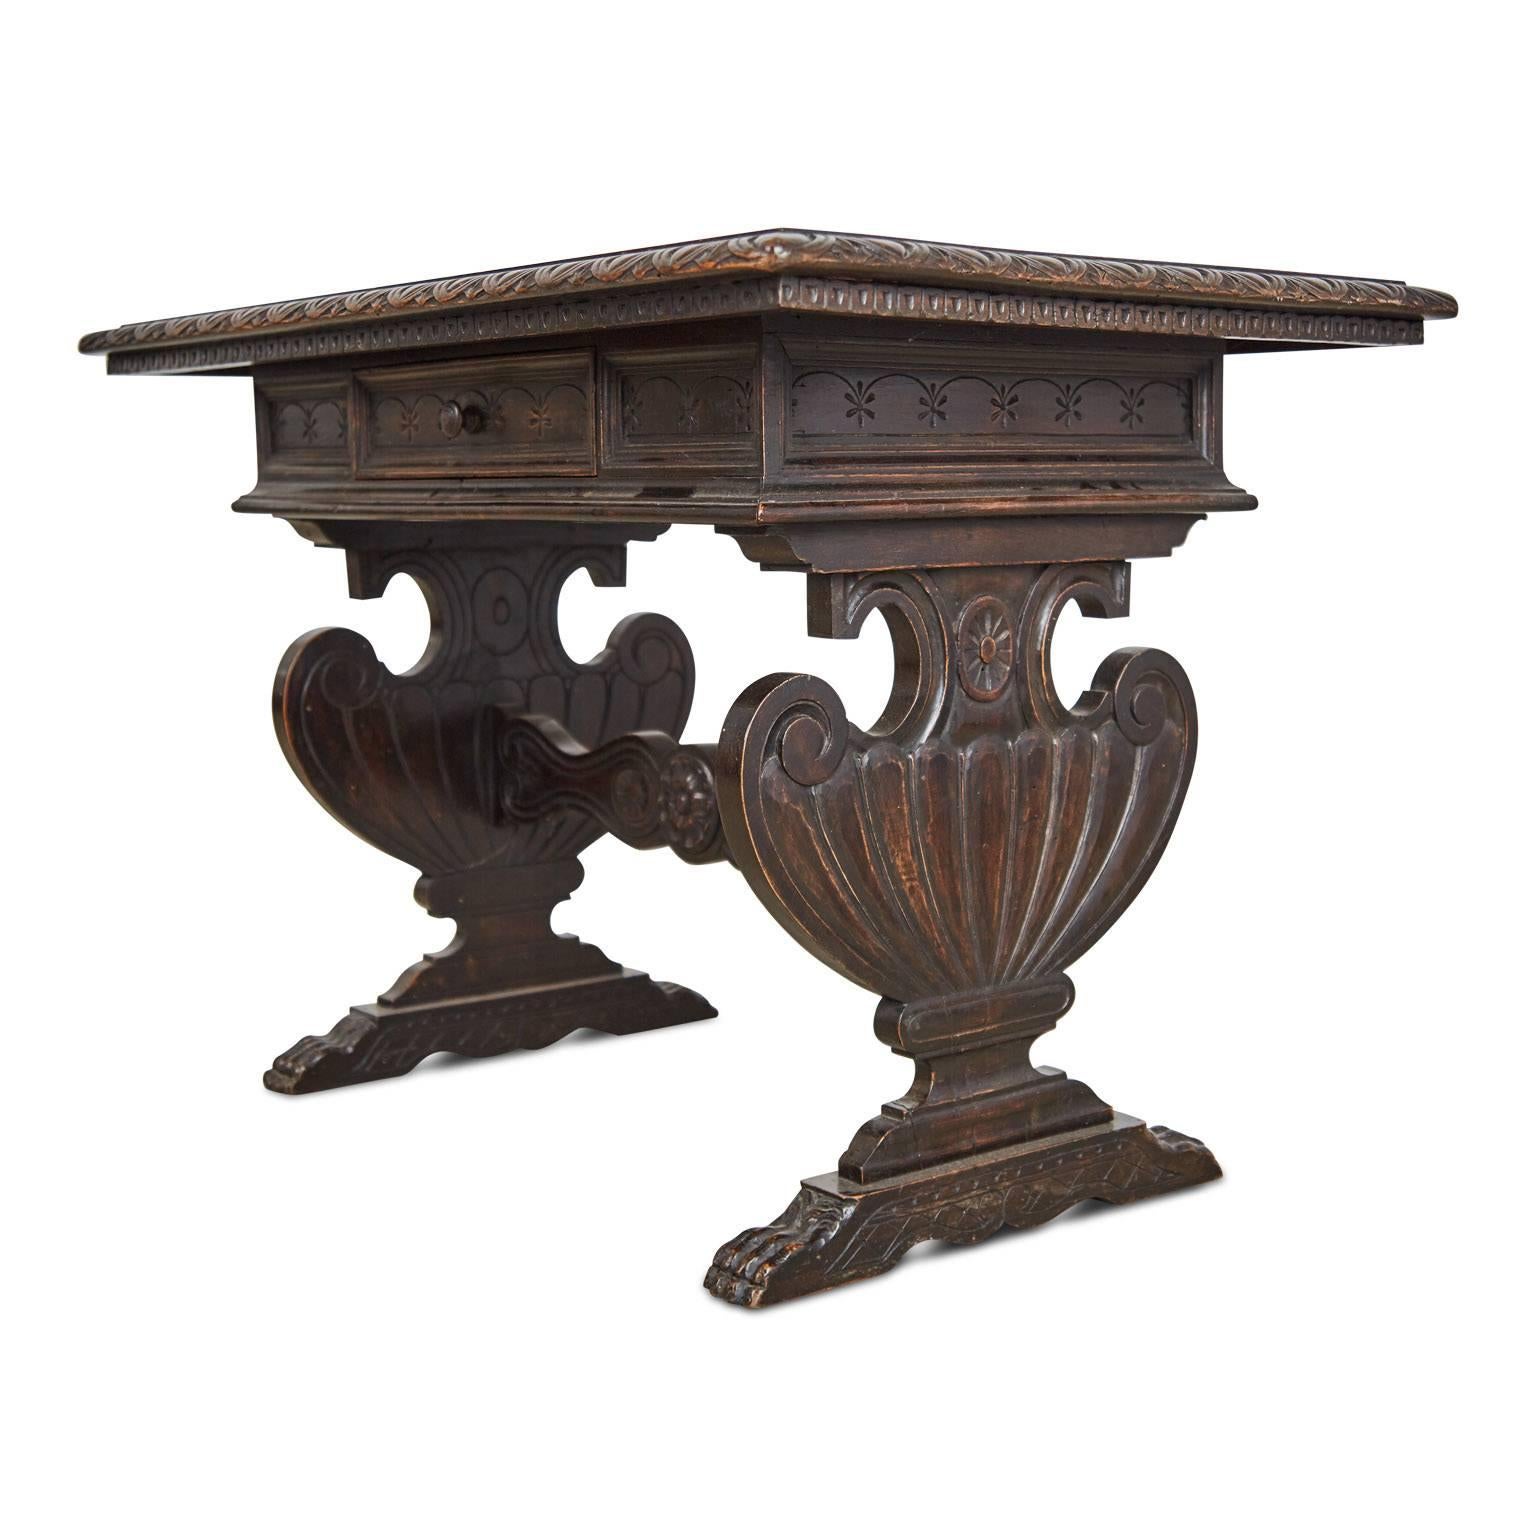 Solid walnut Renaissance Revival trestle table from the mid-19th century. Comprising of a rectangular top with carved egg and dart edge above a single drawer, with trestle supports in the form of Tuscan vases and a detailed stretcher uniting them